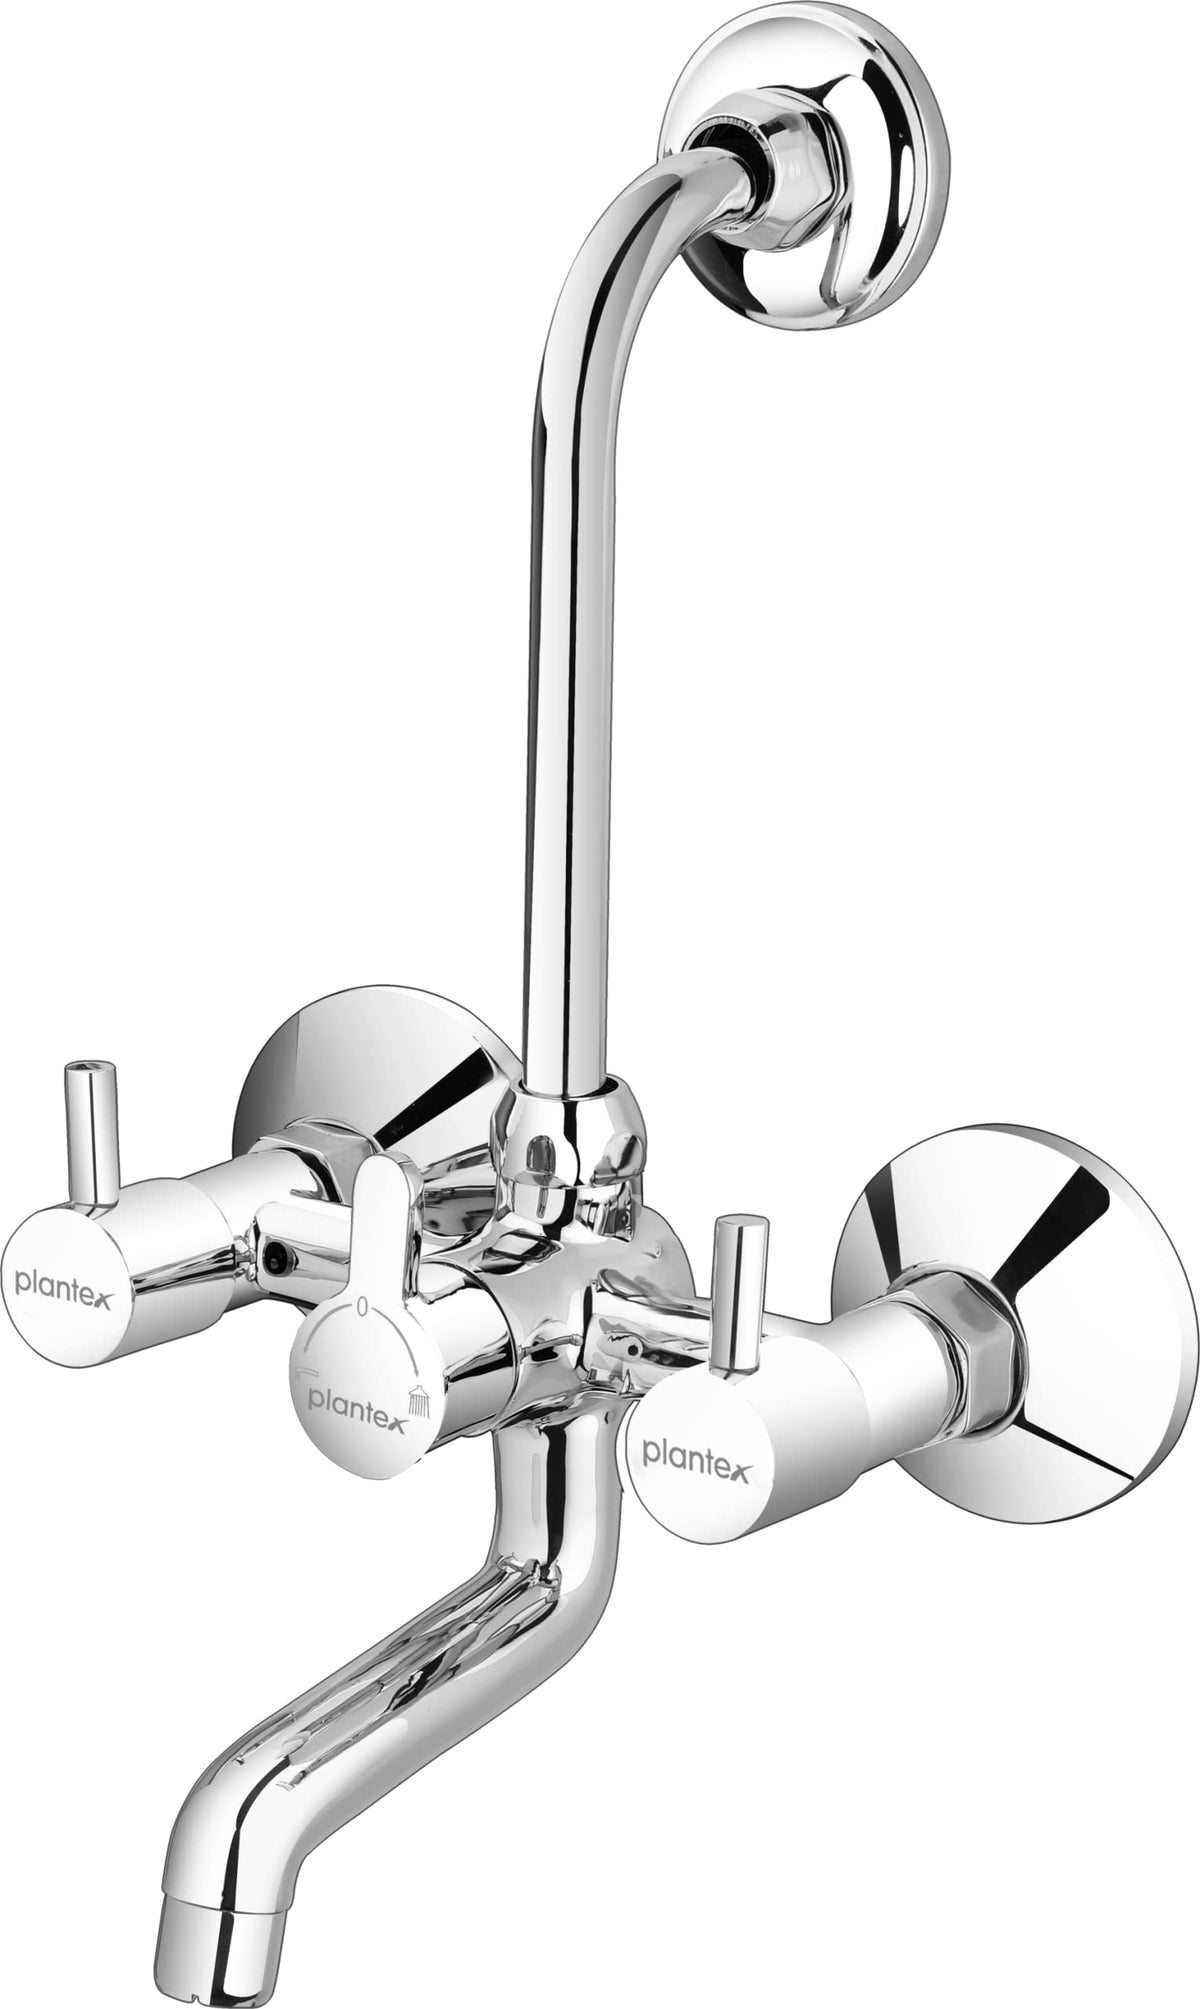 Plantex ICO-918, Pure Brass Telephonic Wall Mixer with Bend for Arrangement of Overhead Shower/2-In-1 Wall Mixer for Bathroom with Brass Wall Flange & Teflon Tape - Wall Mount (Mirror-Chrome Finish)